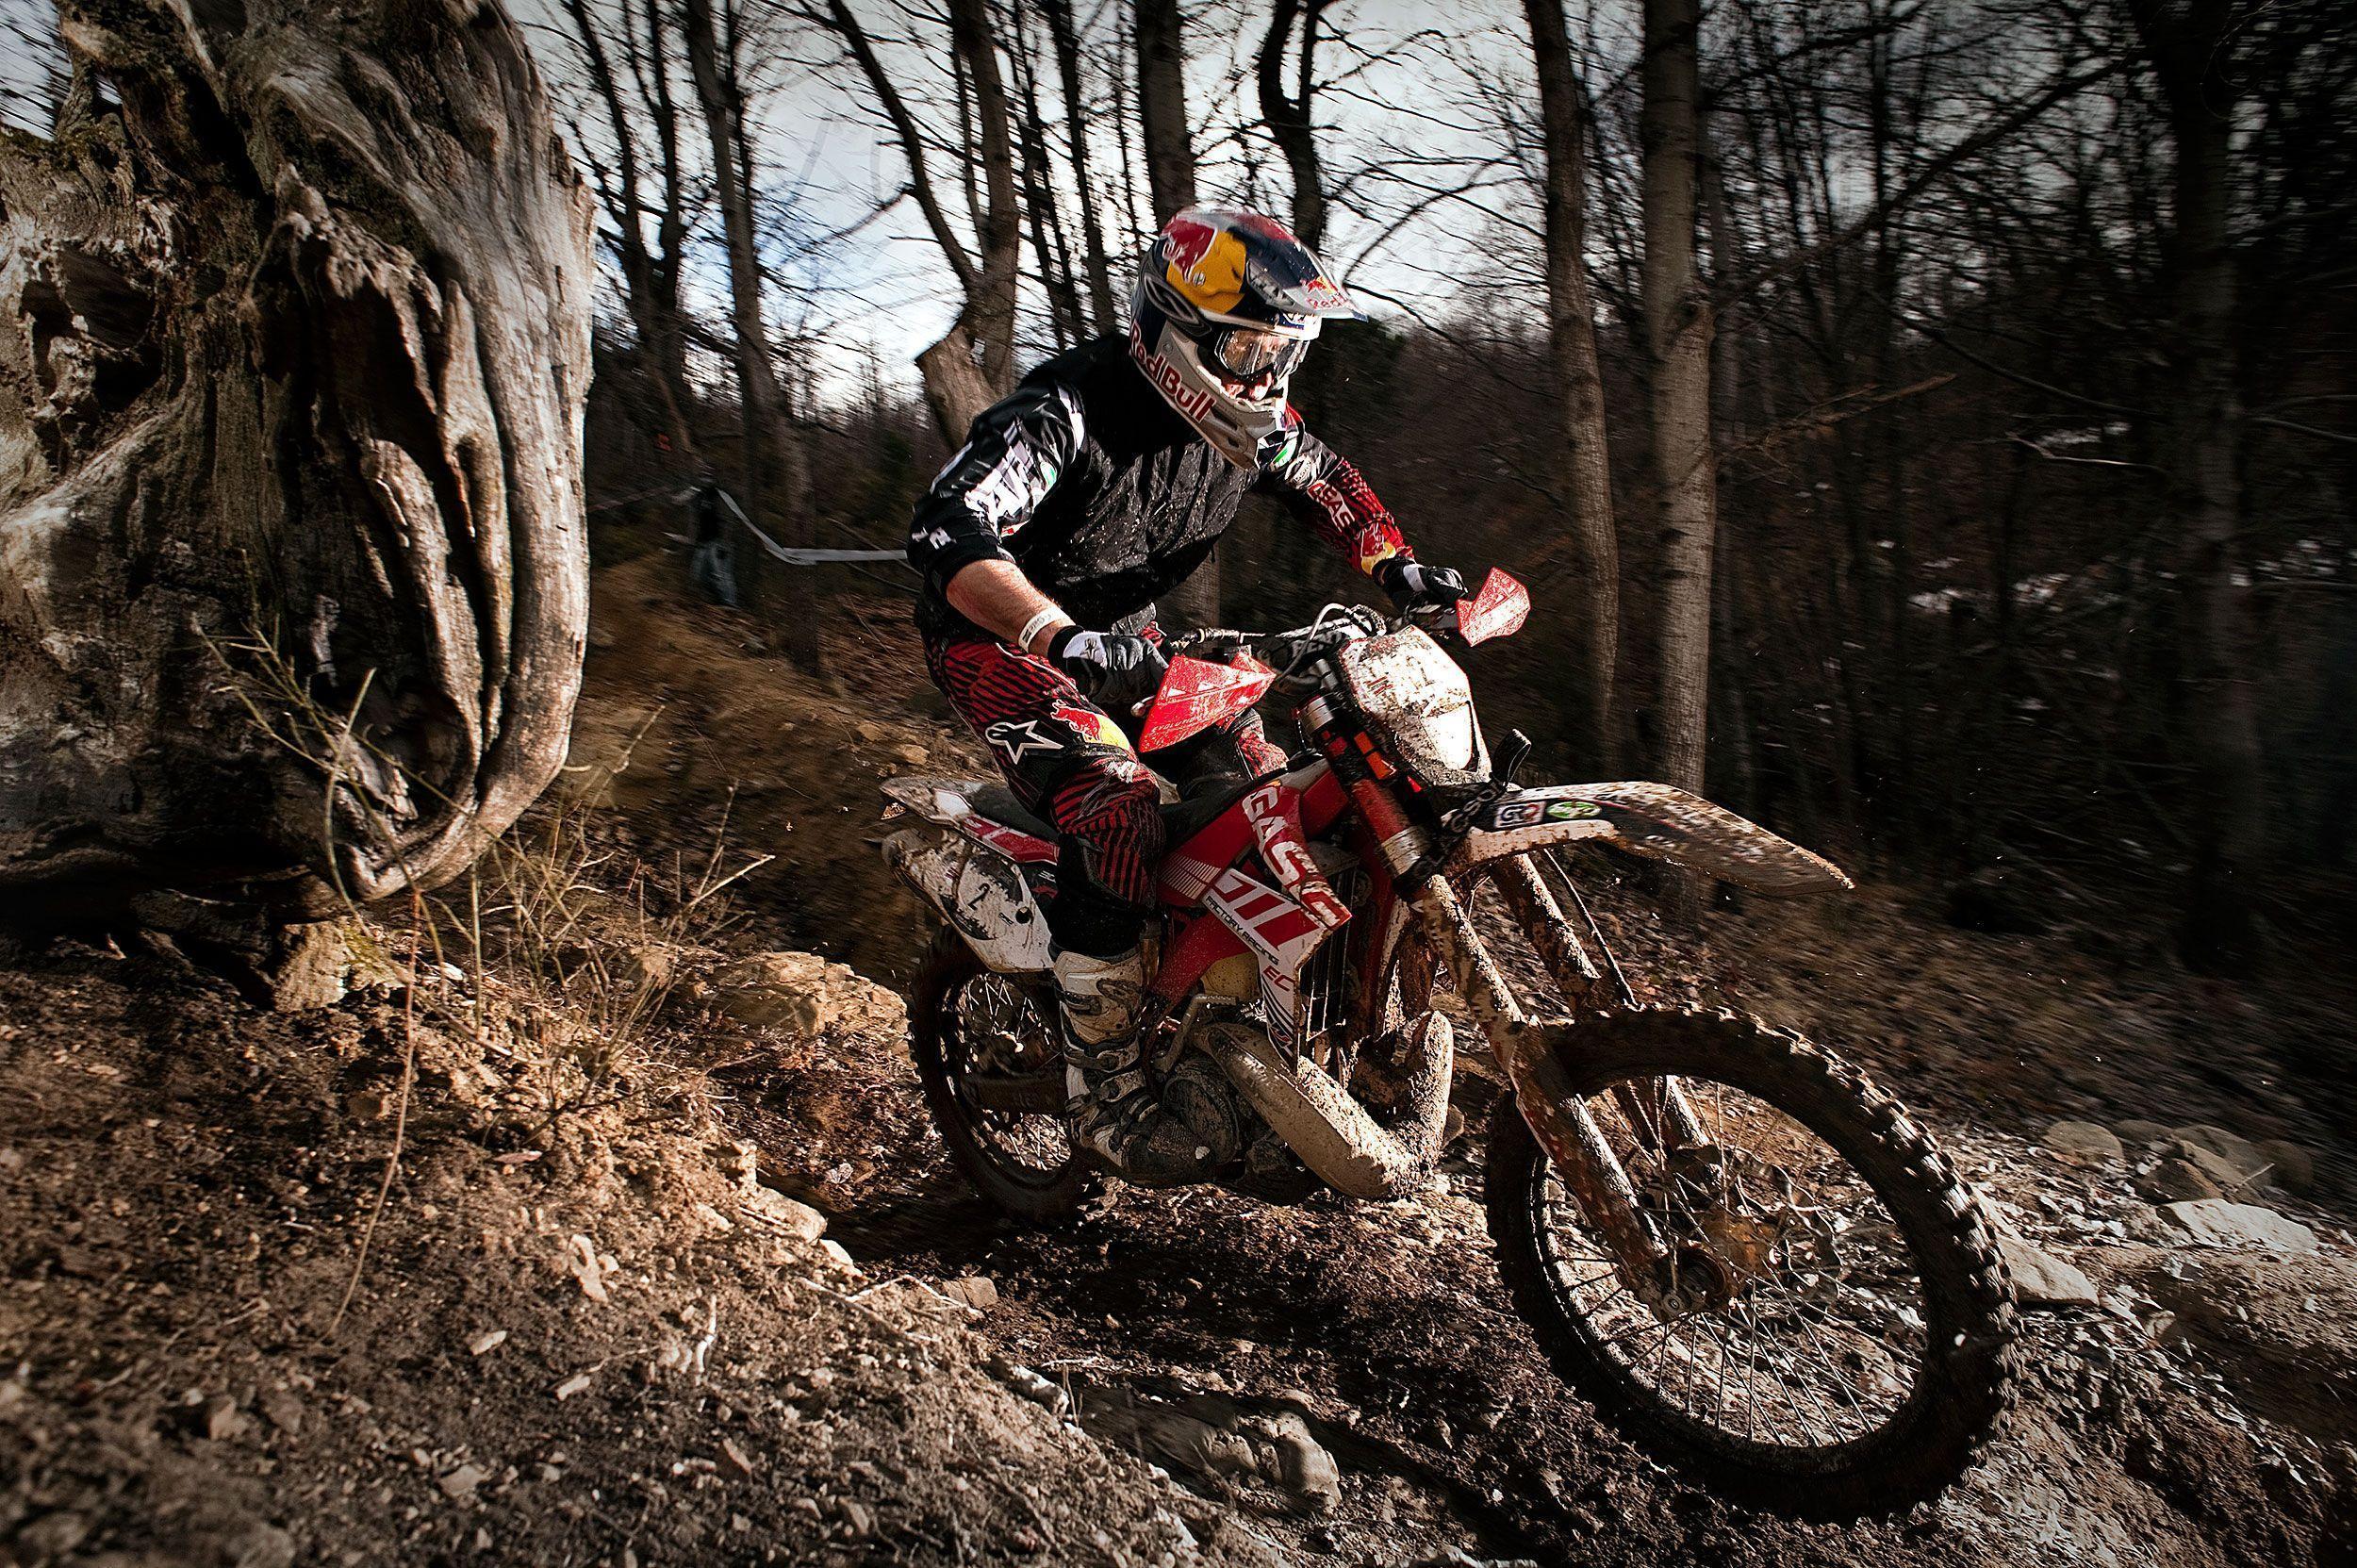 High Quality Enduro Wallpaper. Full HD Picture